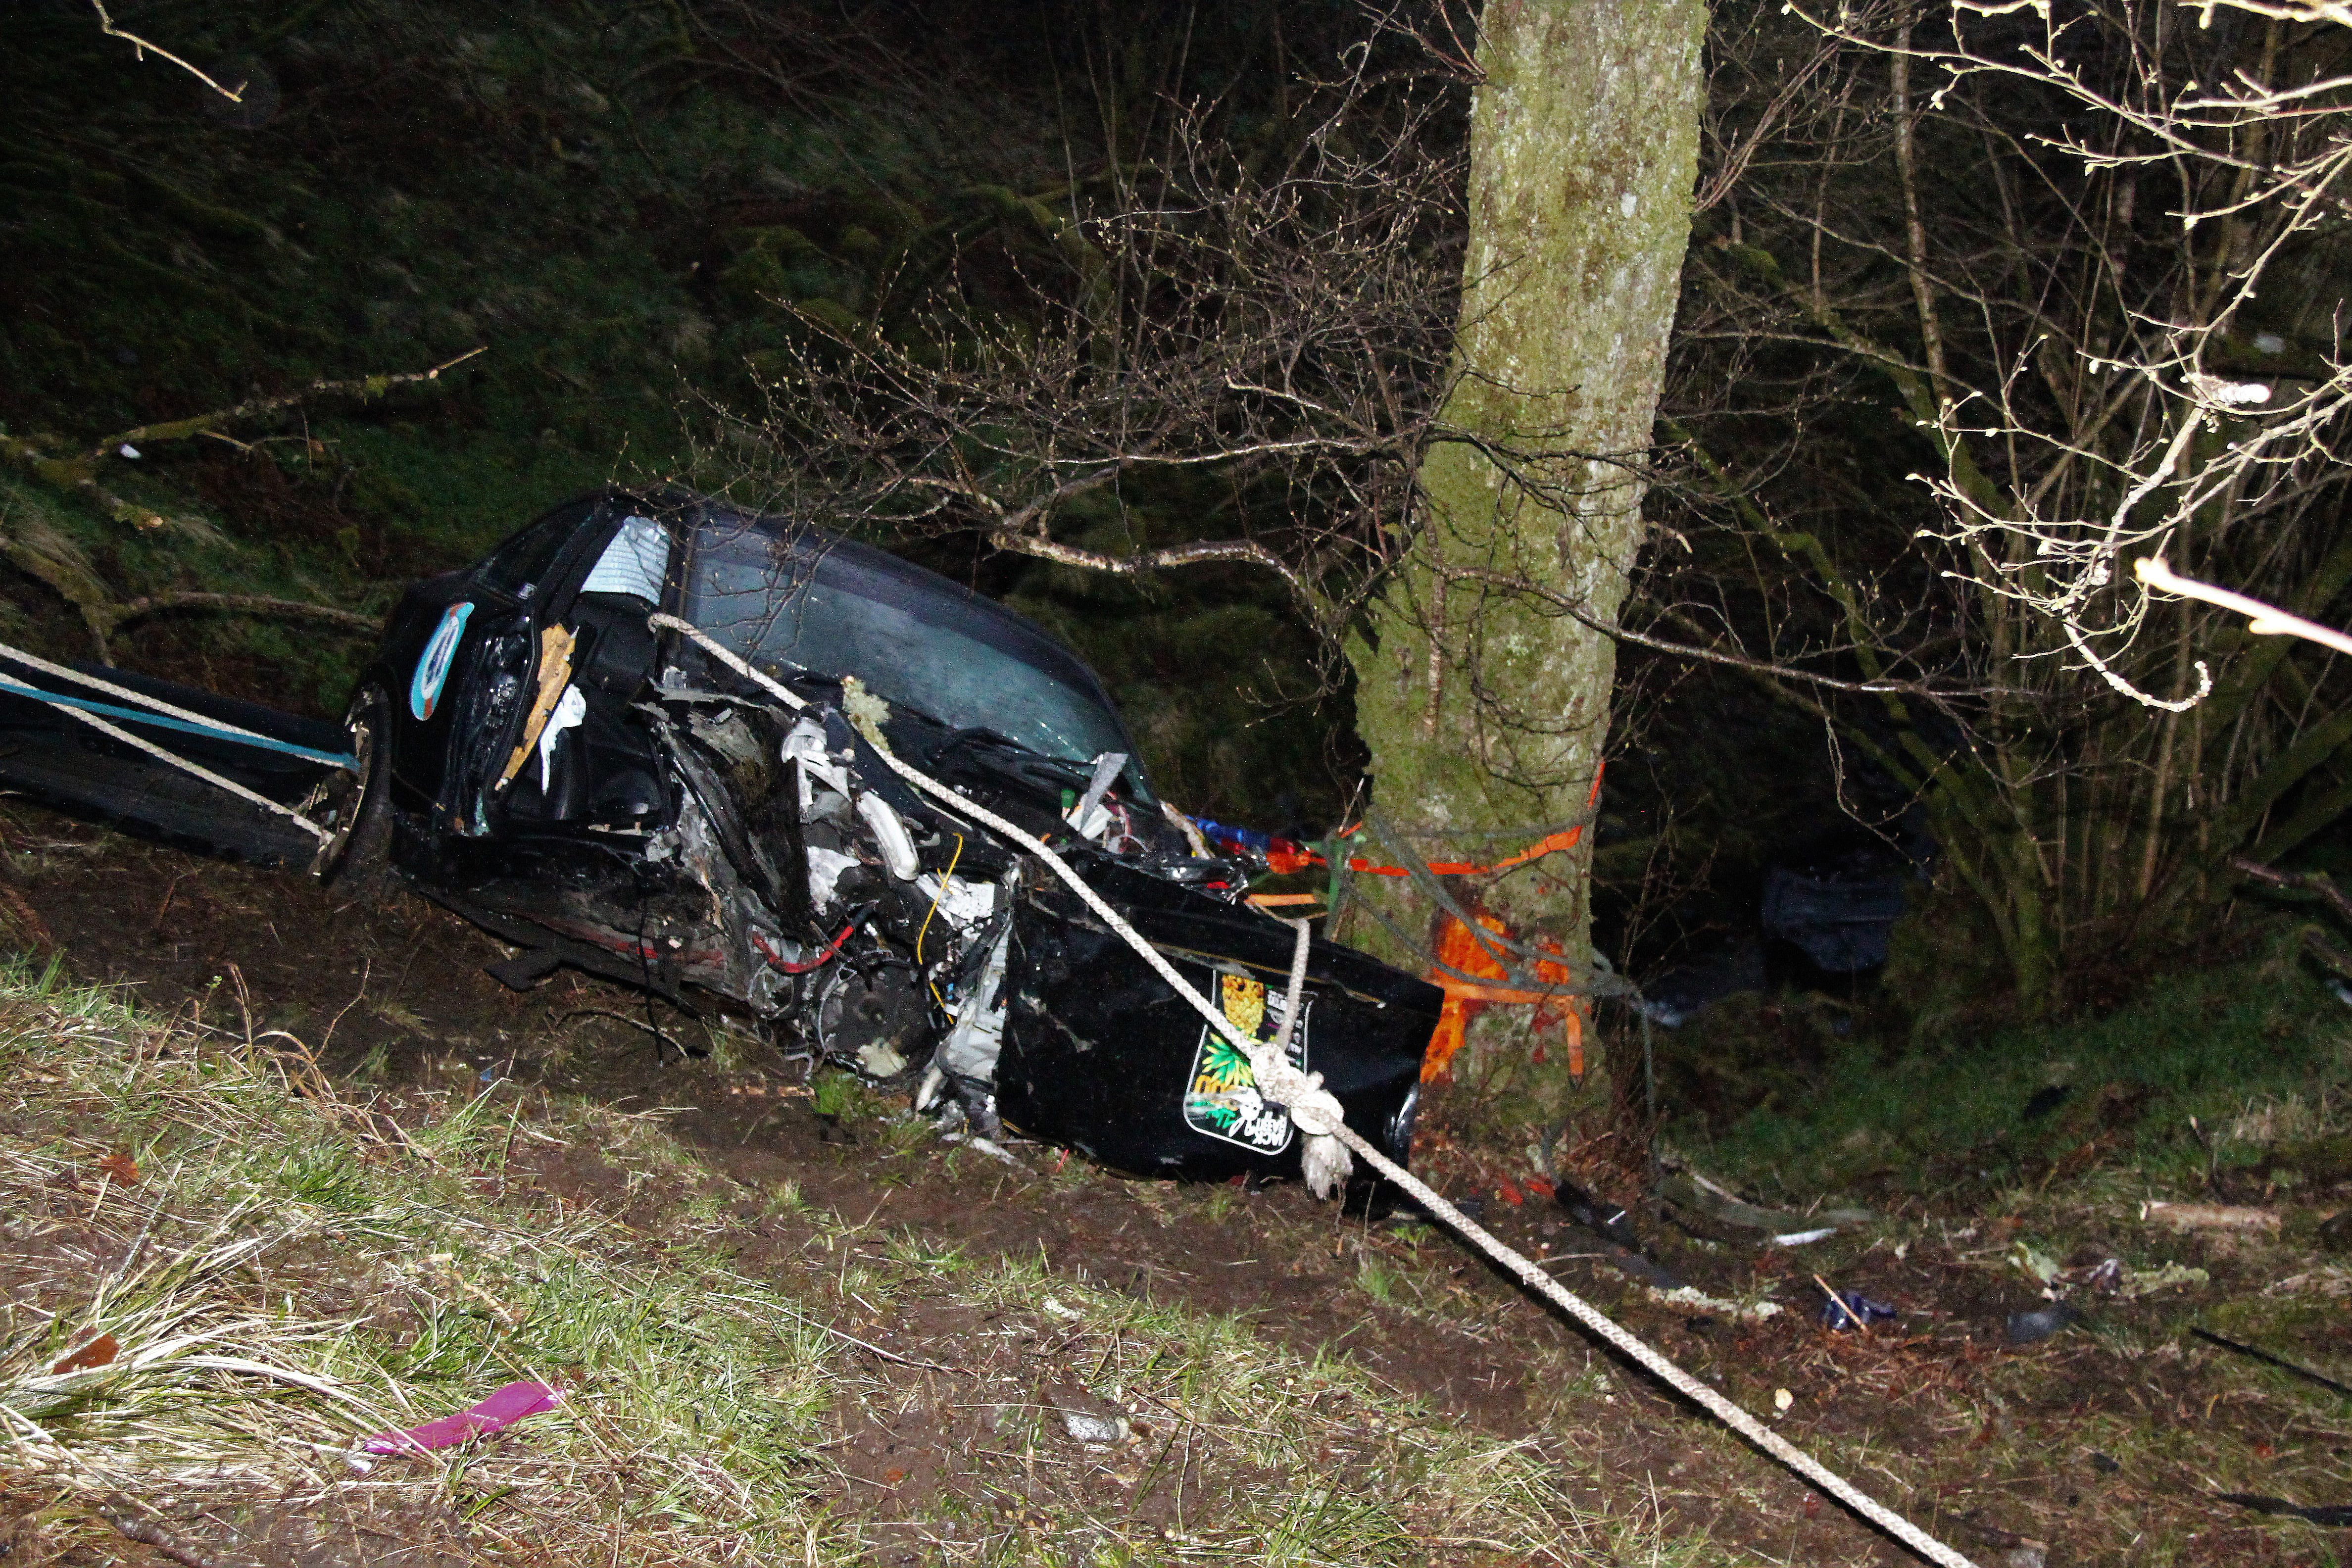 The road accident on the A82 near Letterfinlay.